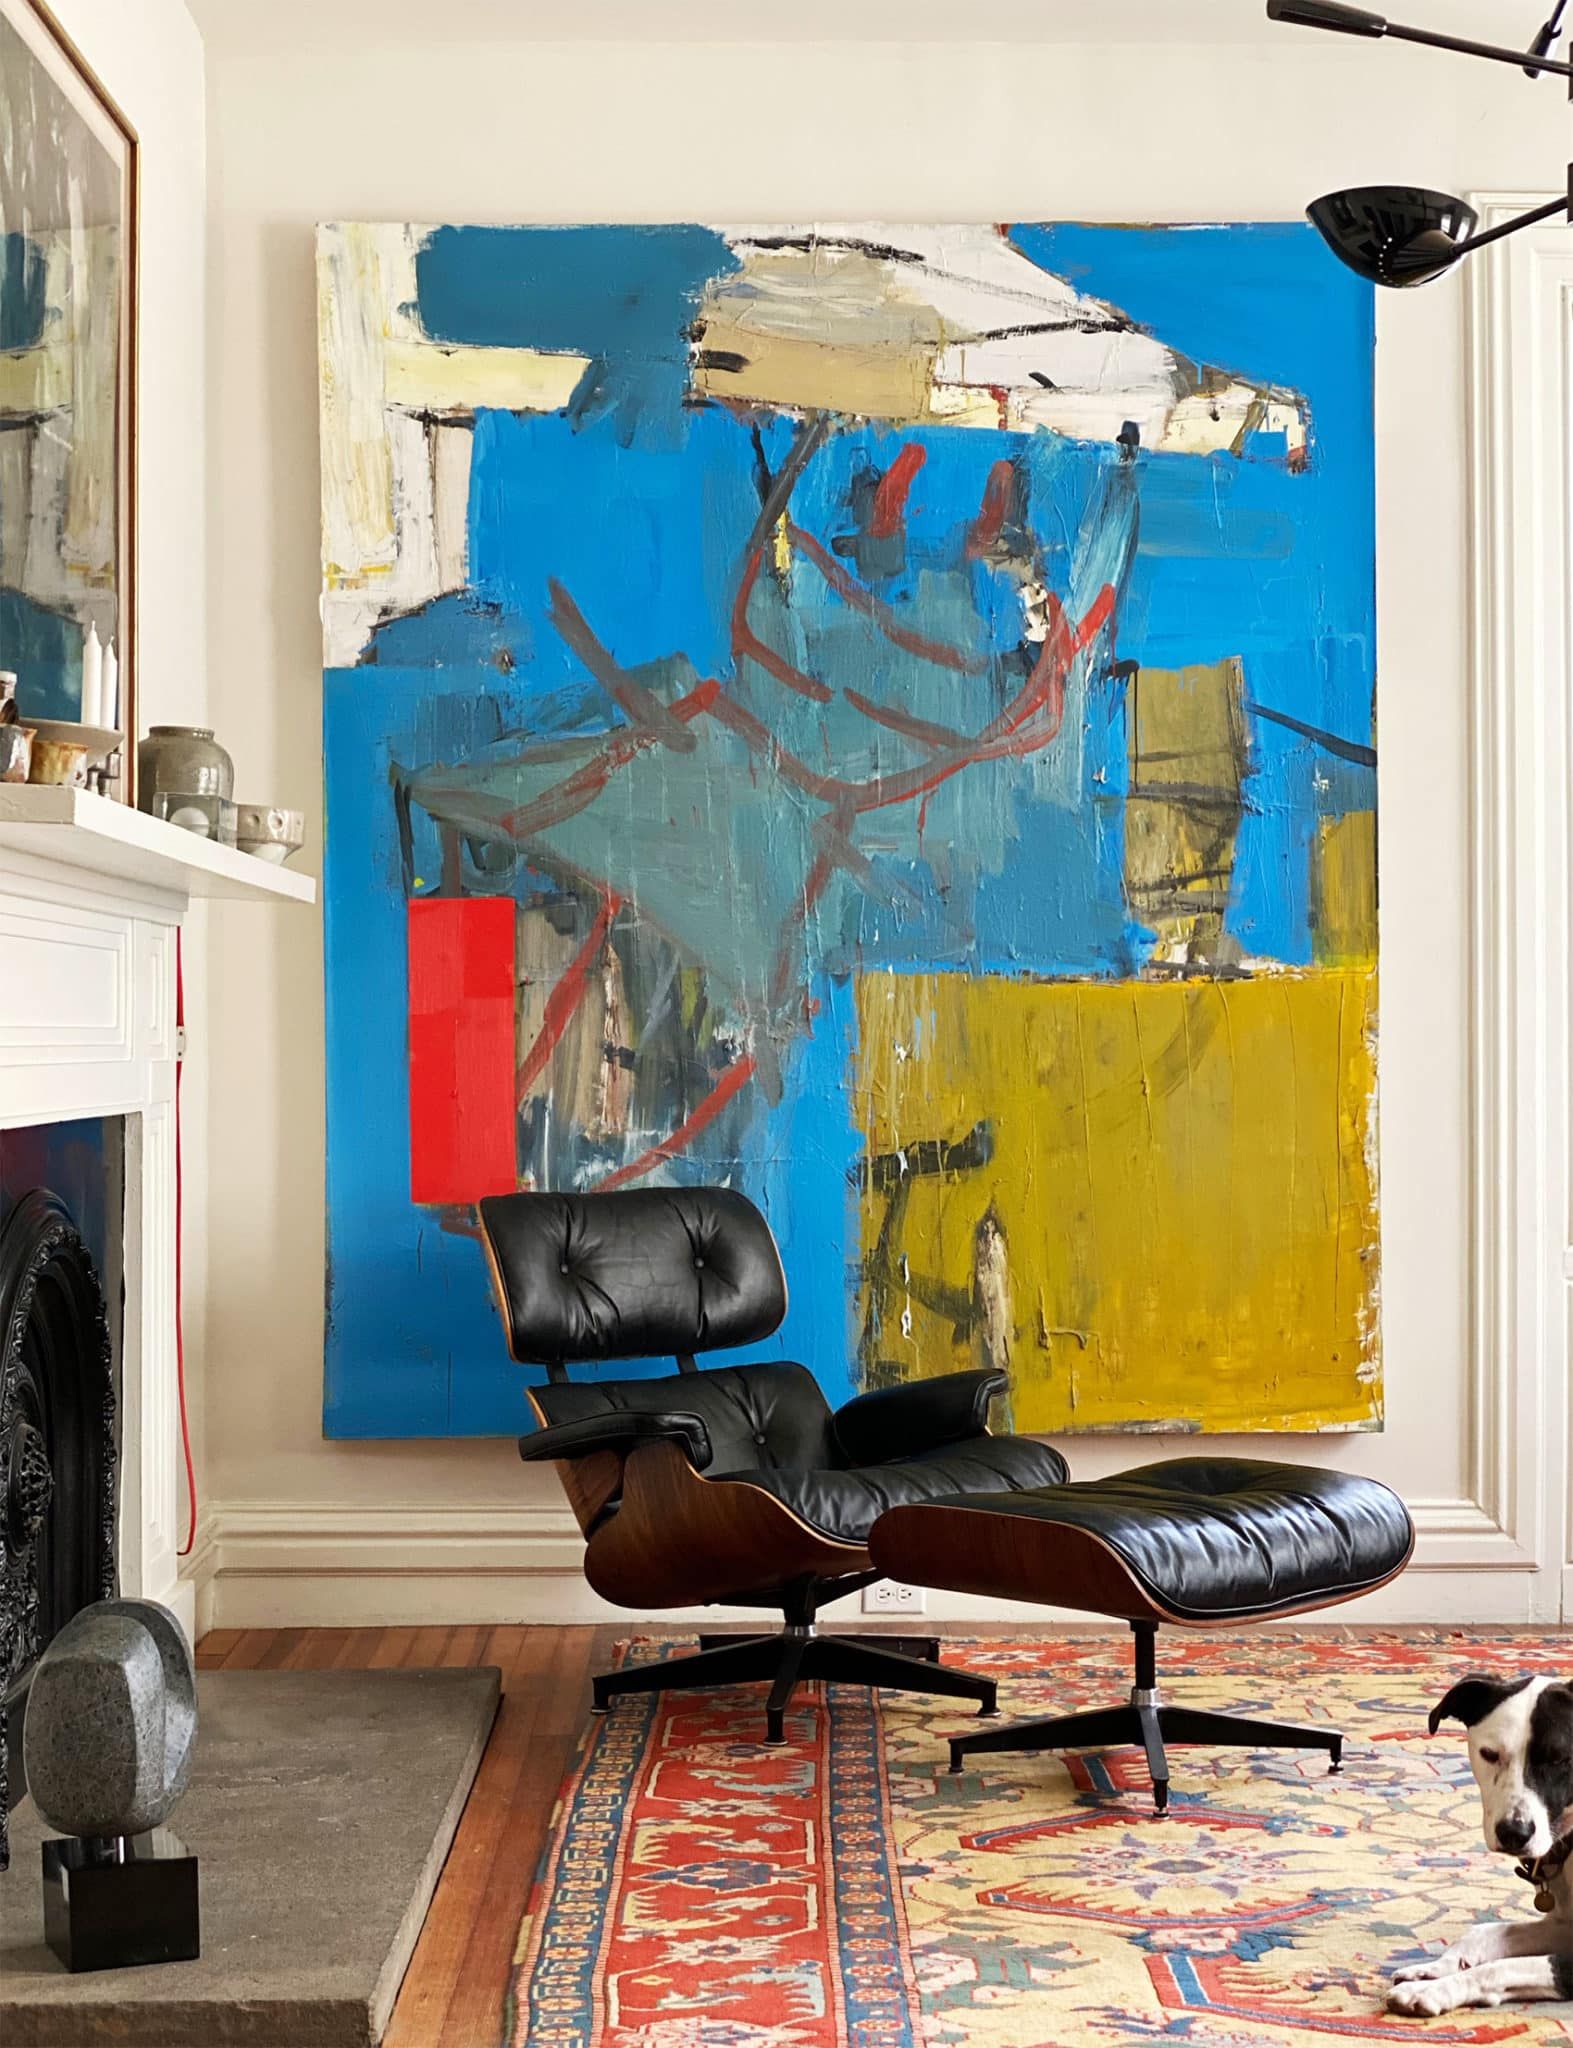 Transform Your Living Room with Stunning Decorative Paintings